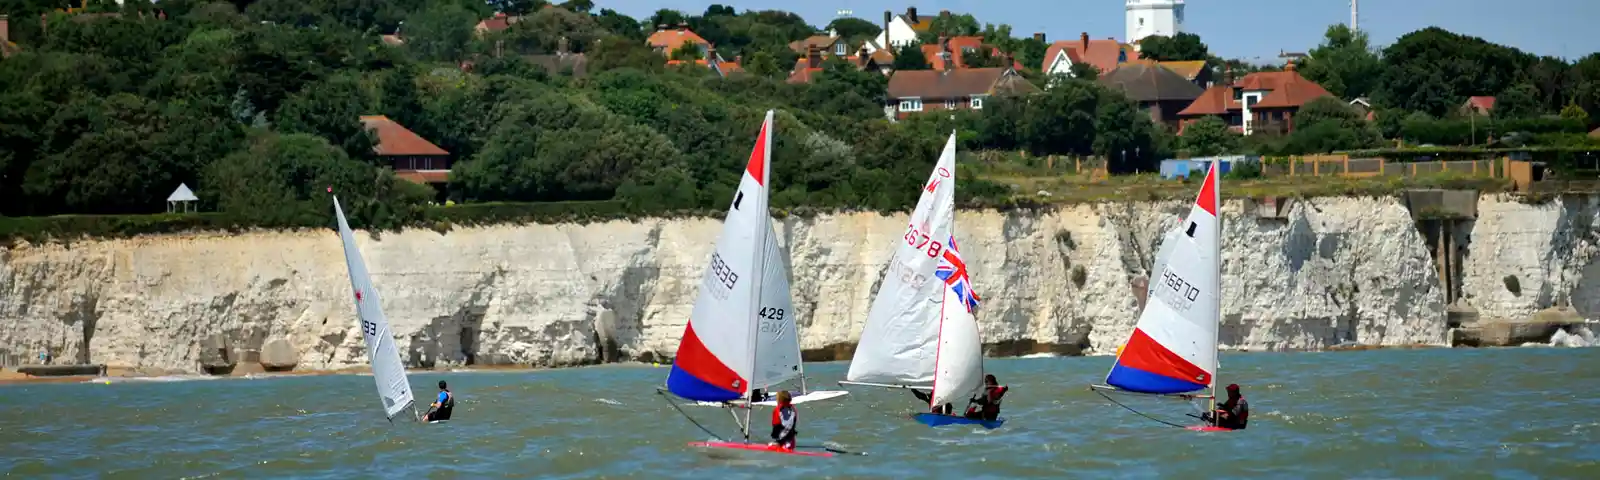 EDITED Sailing, North Foreland Lighthouse In Background Credit Thanet Tourism